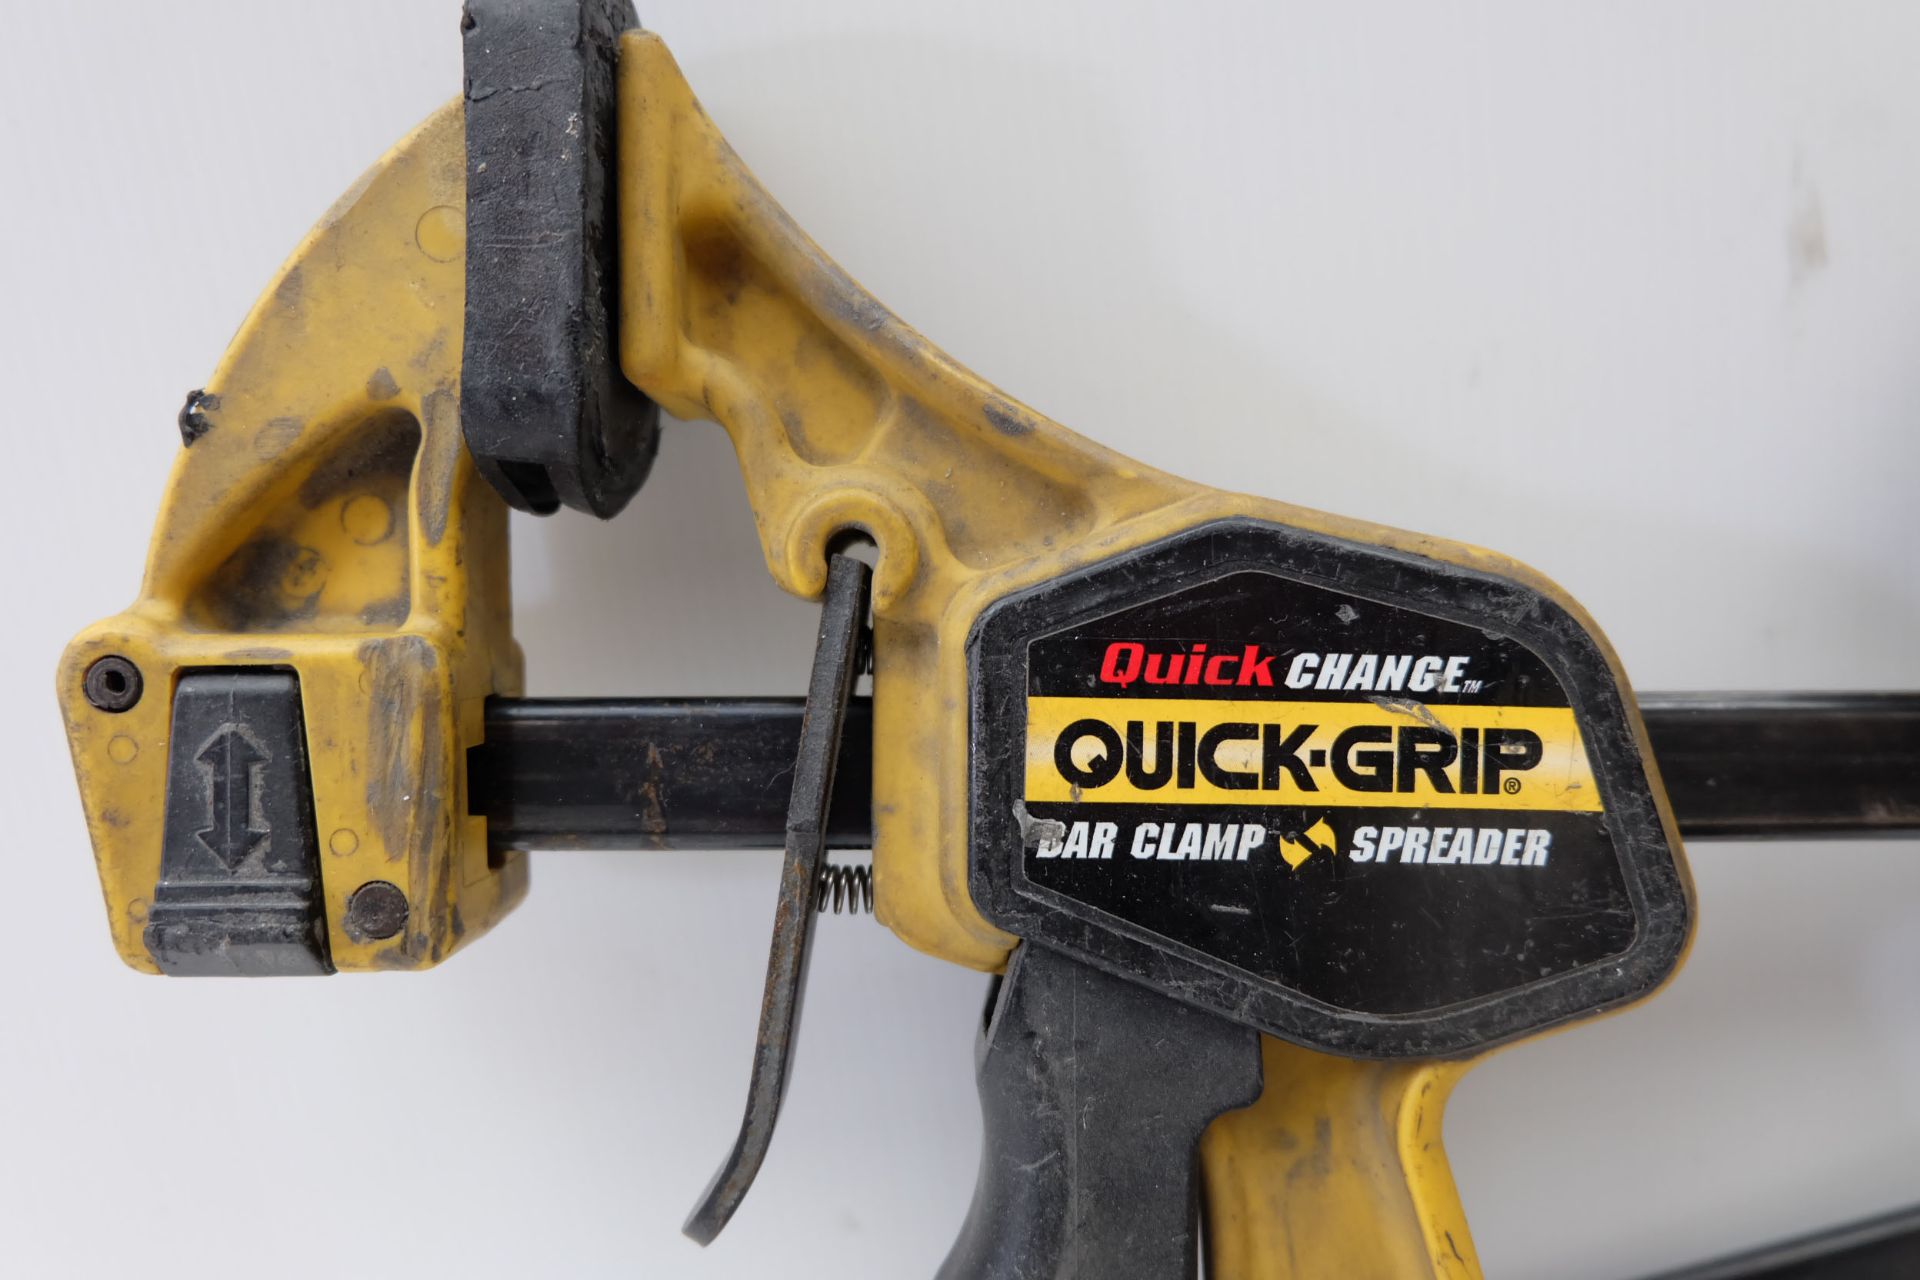 6 x Quick Grip Bar Clamp Spreaders & 5 x Handi-Clamp Quick Grips - Image 2 of 4